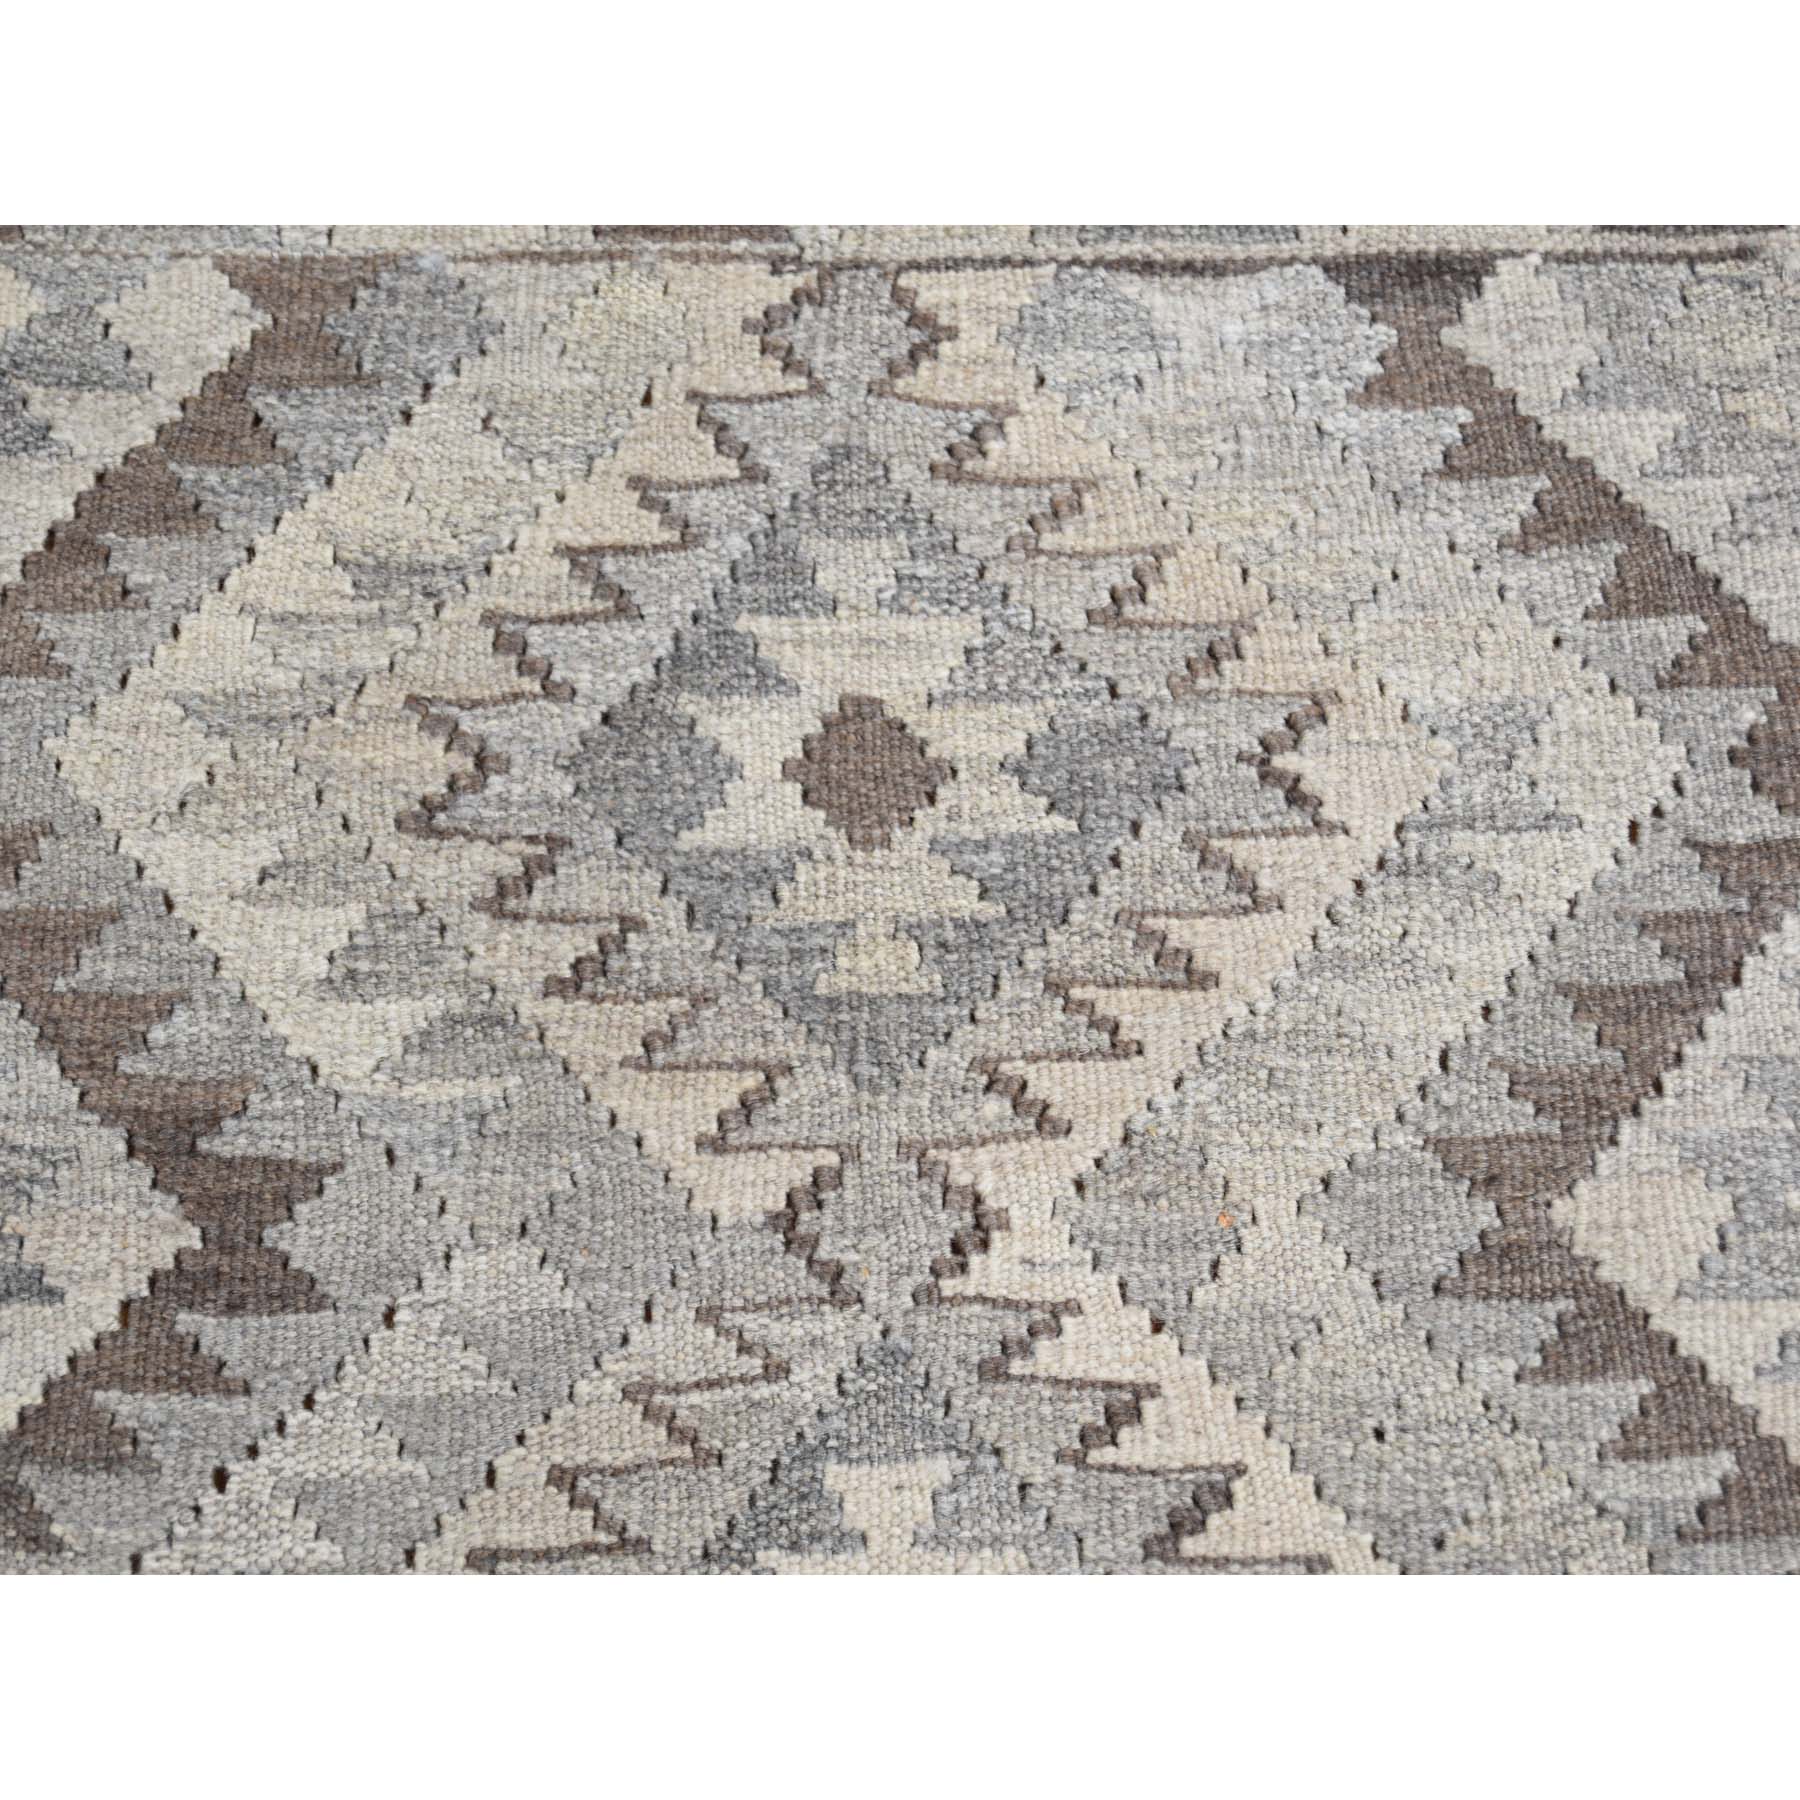 3-1 x4-9  Undyed Natural Wool Afghan Kilim Reversible Hand Woven Oriental Rug 